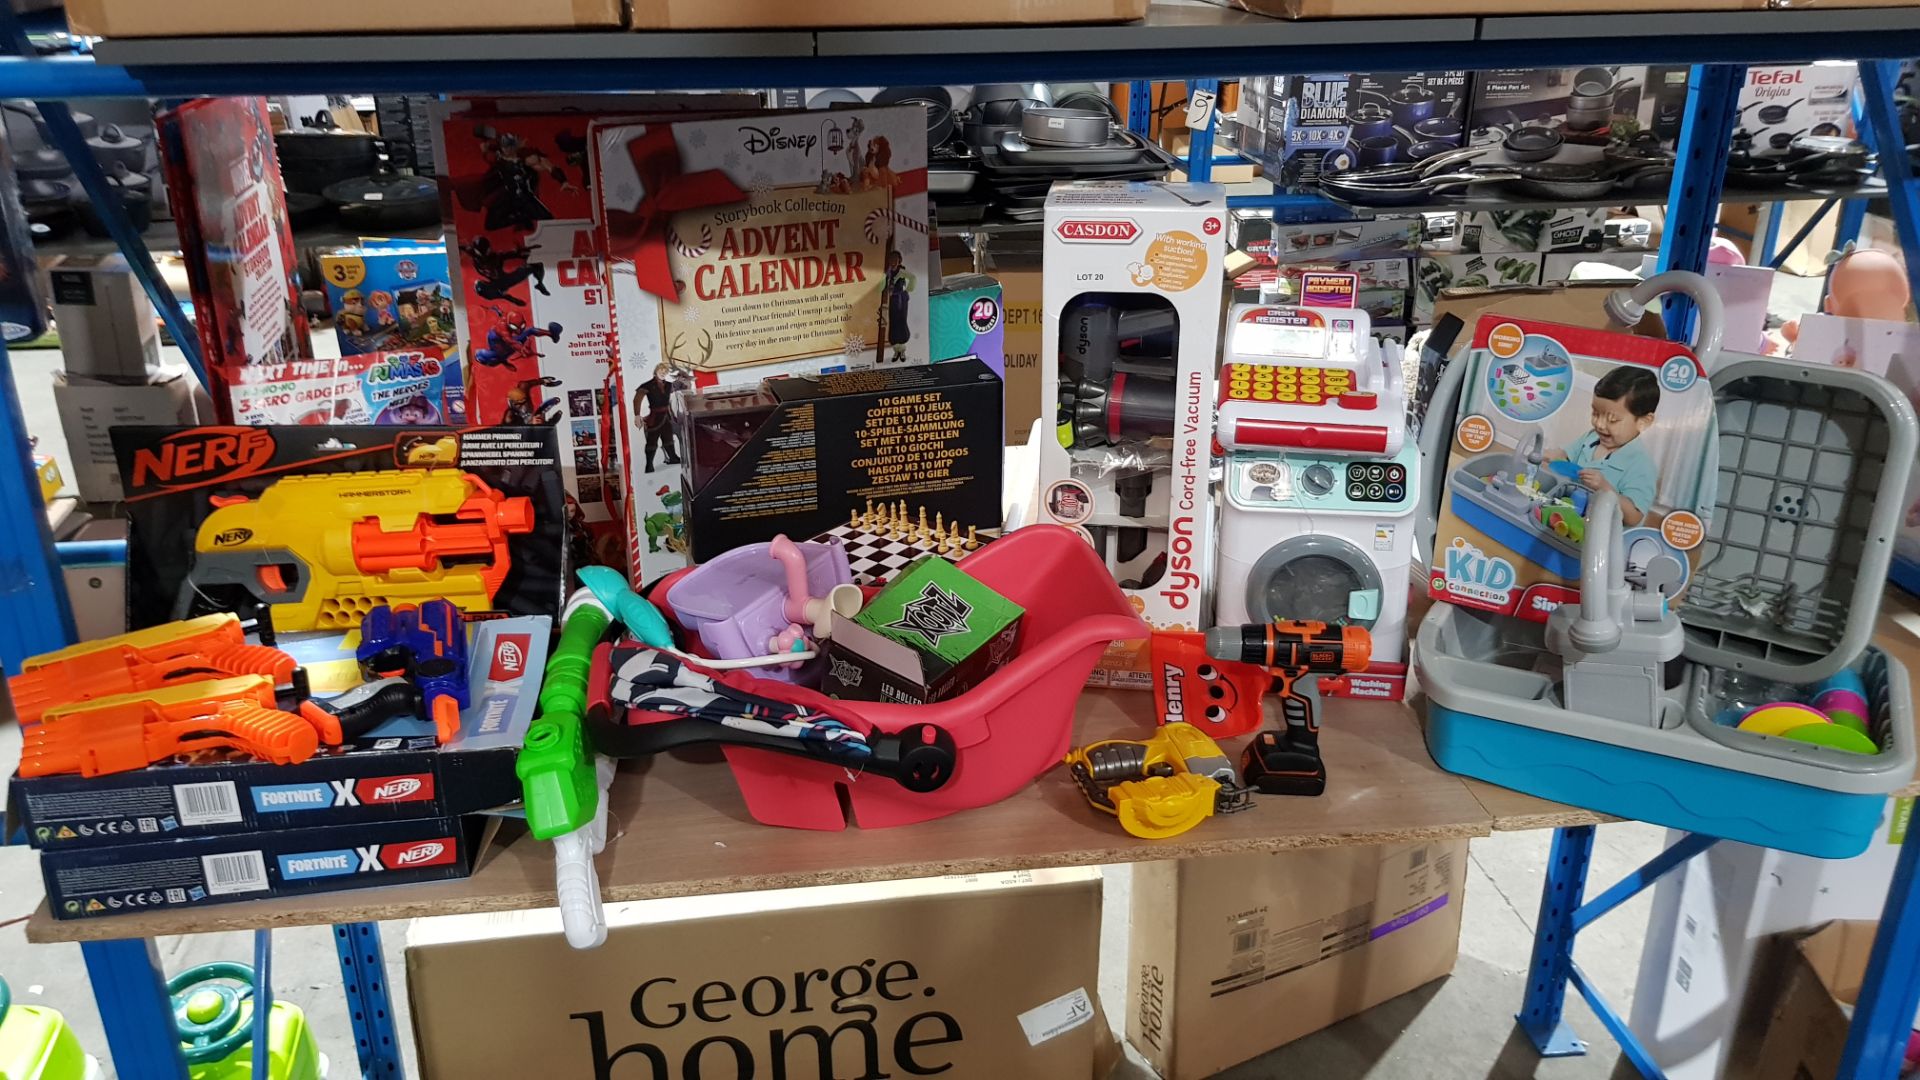 Contents Of Shelf - Mixed Toys To Include Nerf Alphastrike / Fortnite Guns, 10 Game Set, Cadson...